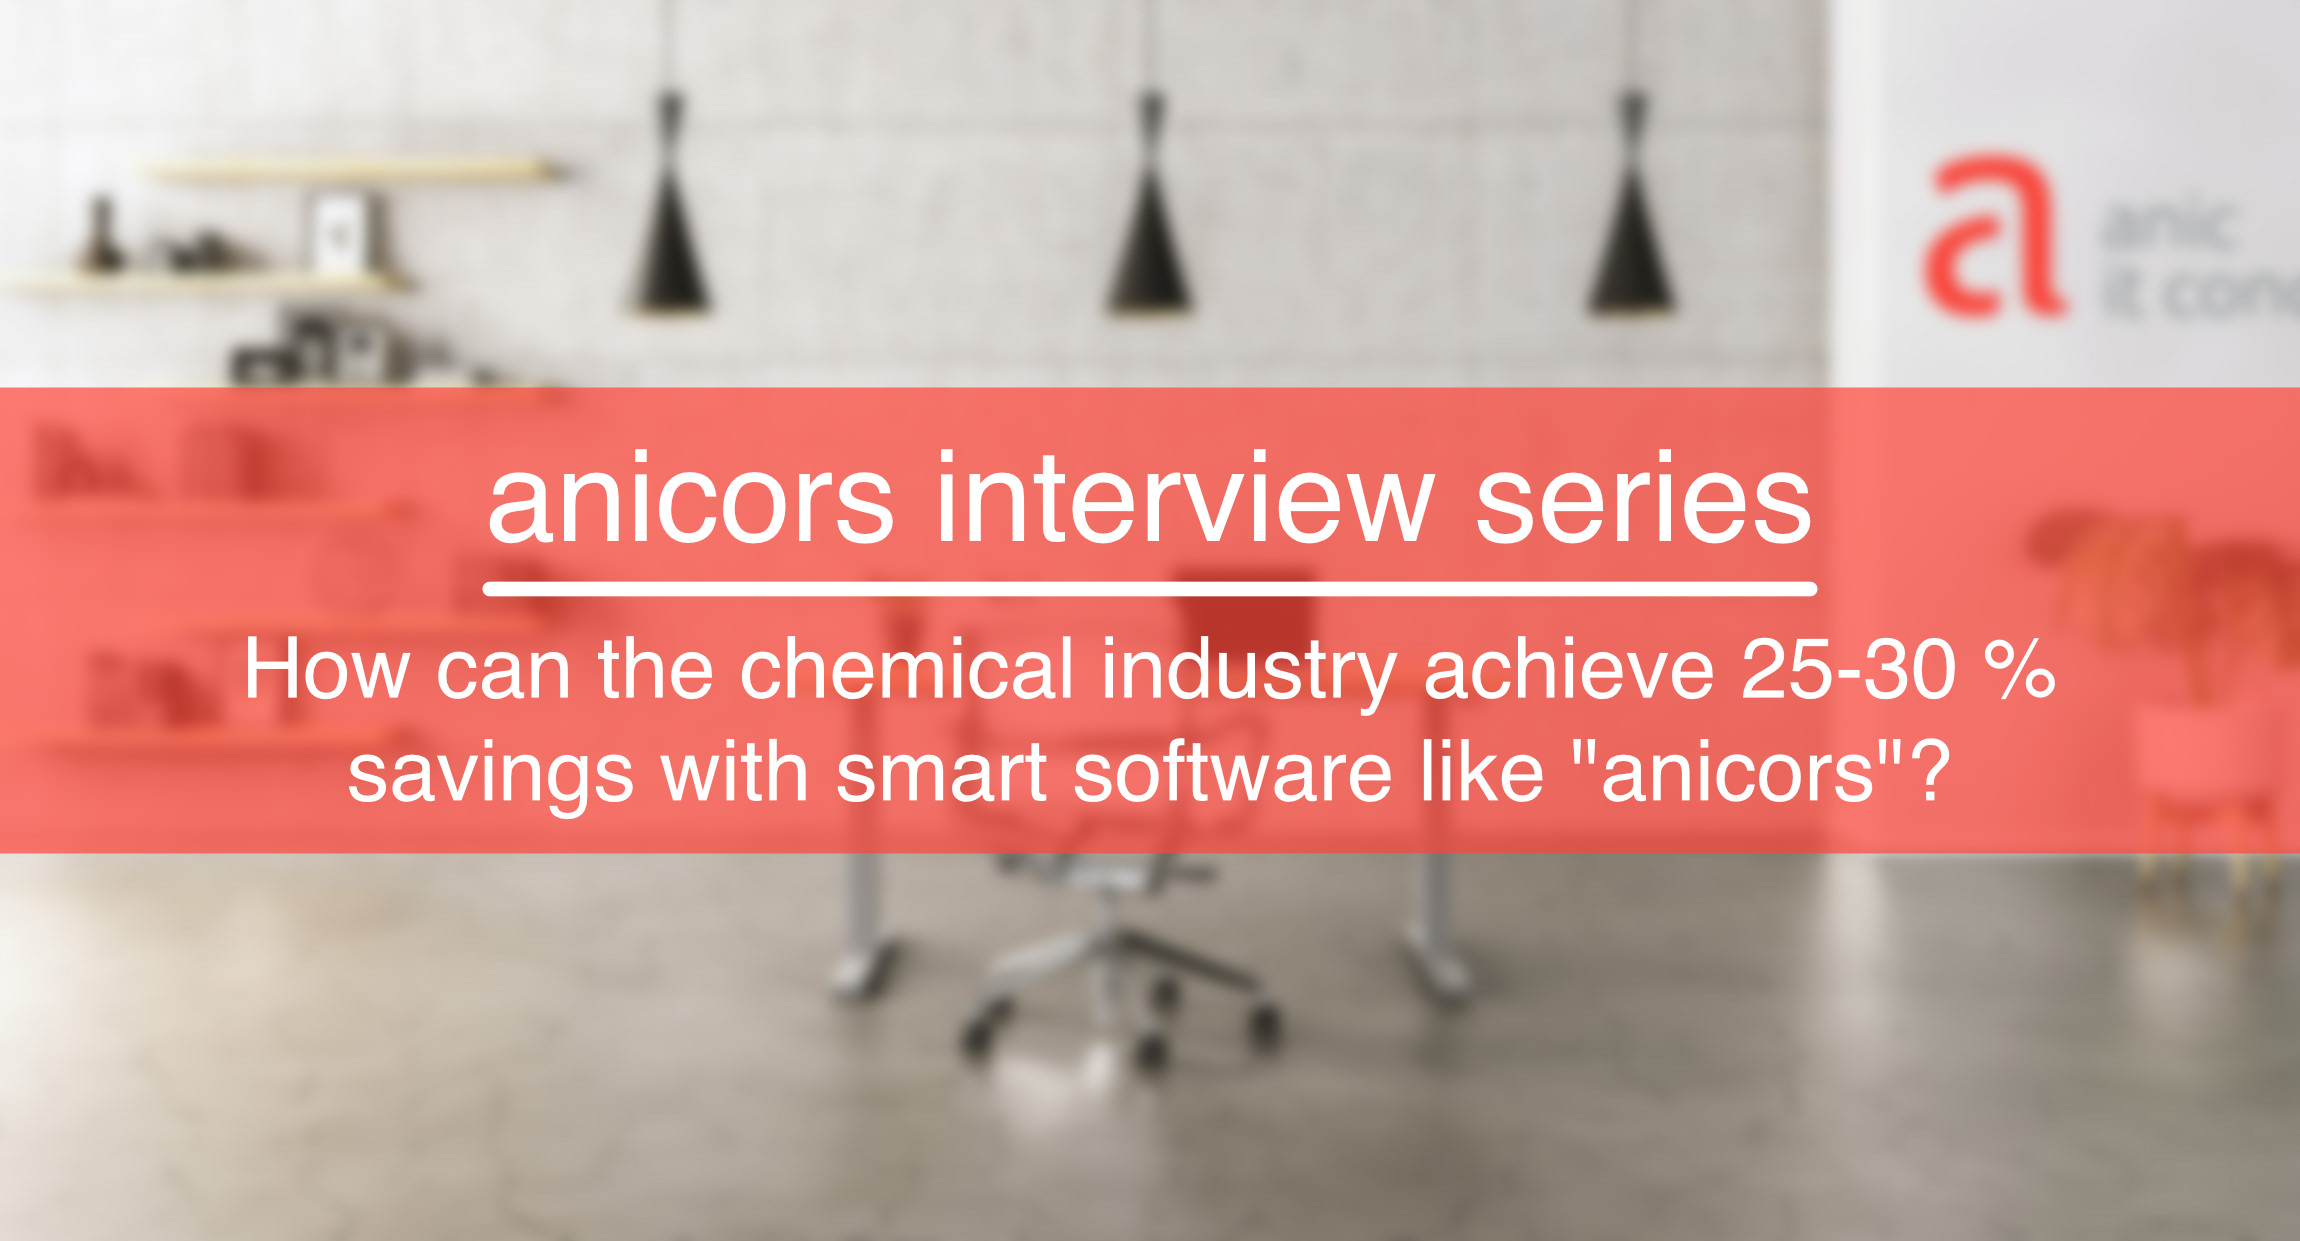 anicors interview series part 3